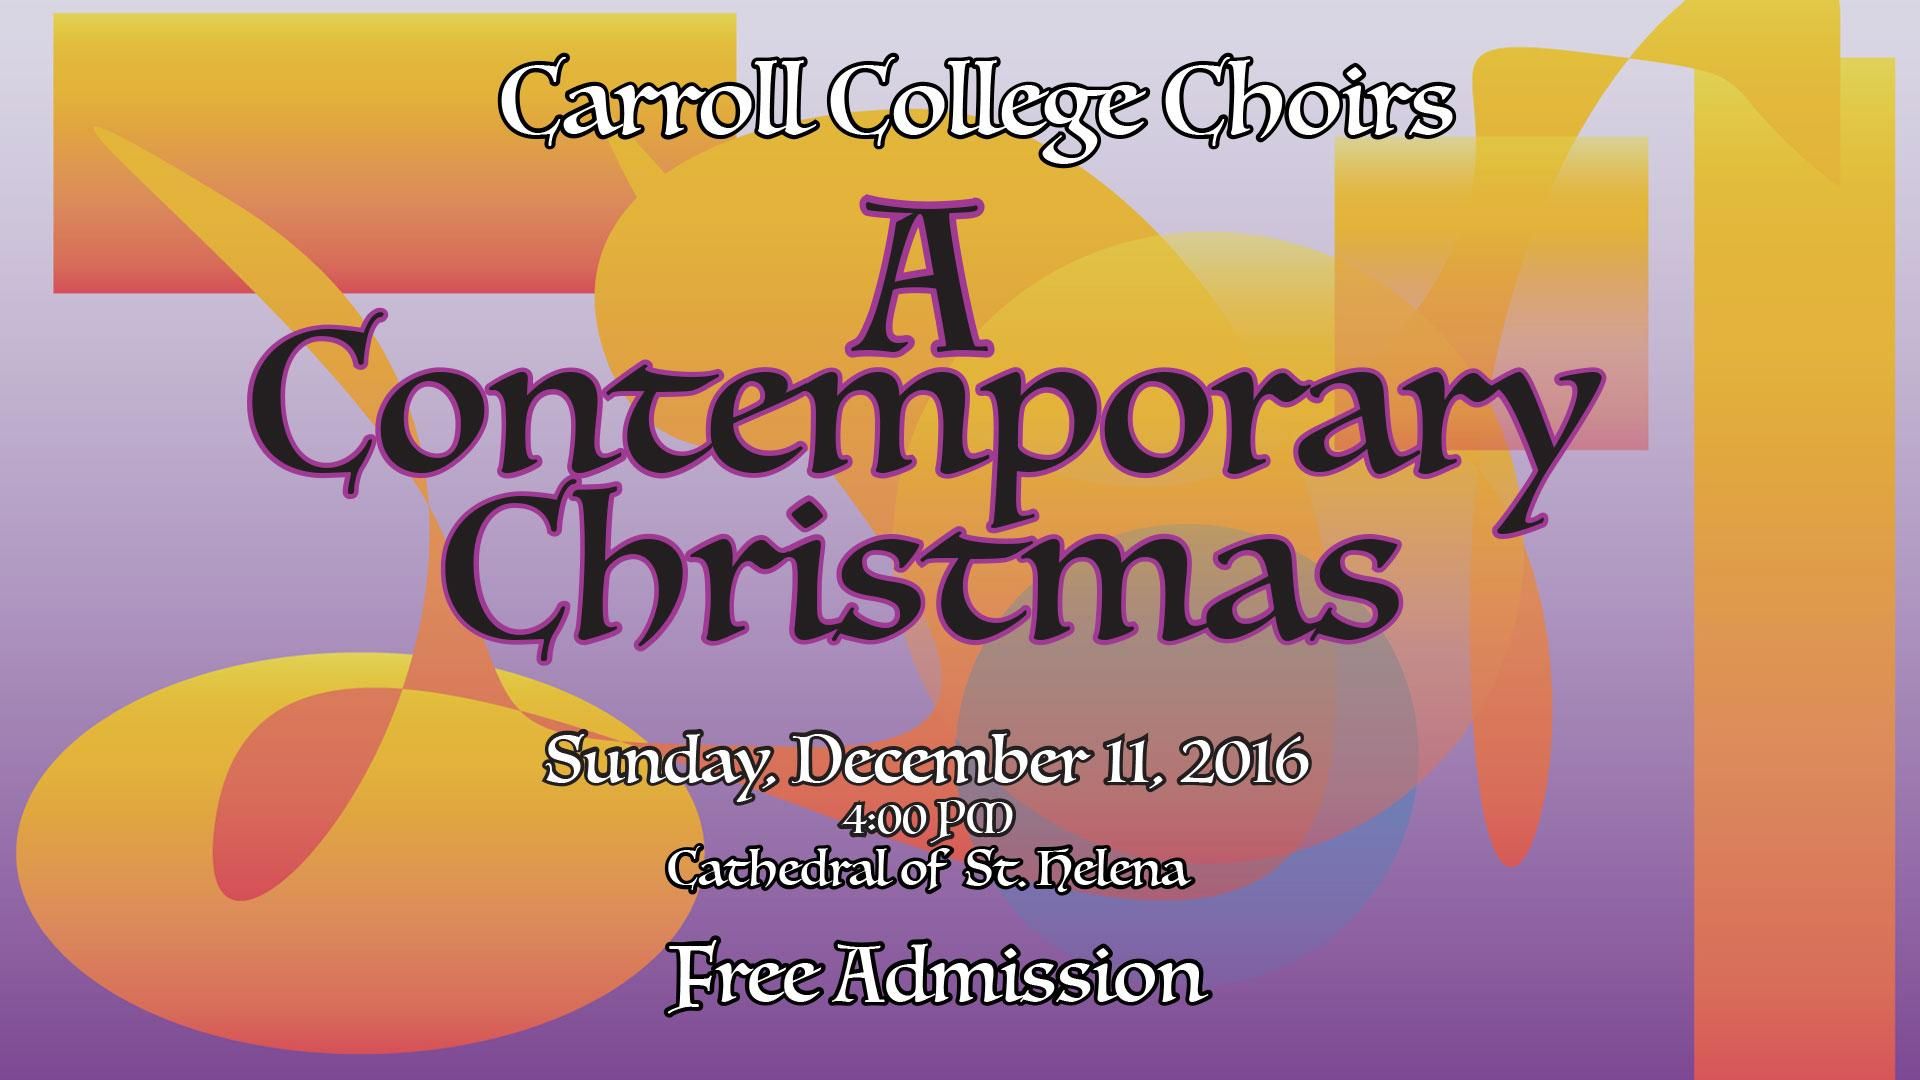 Graphic for Carroll Choirs Christmas Concert